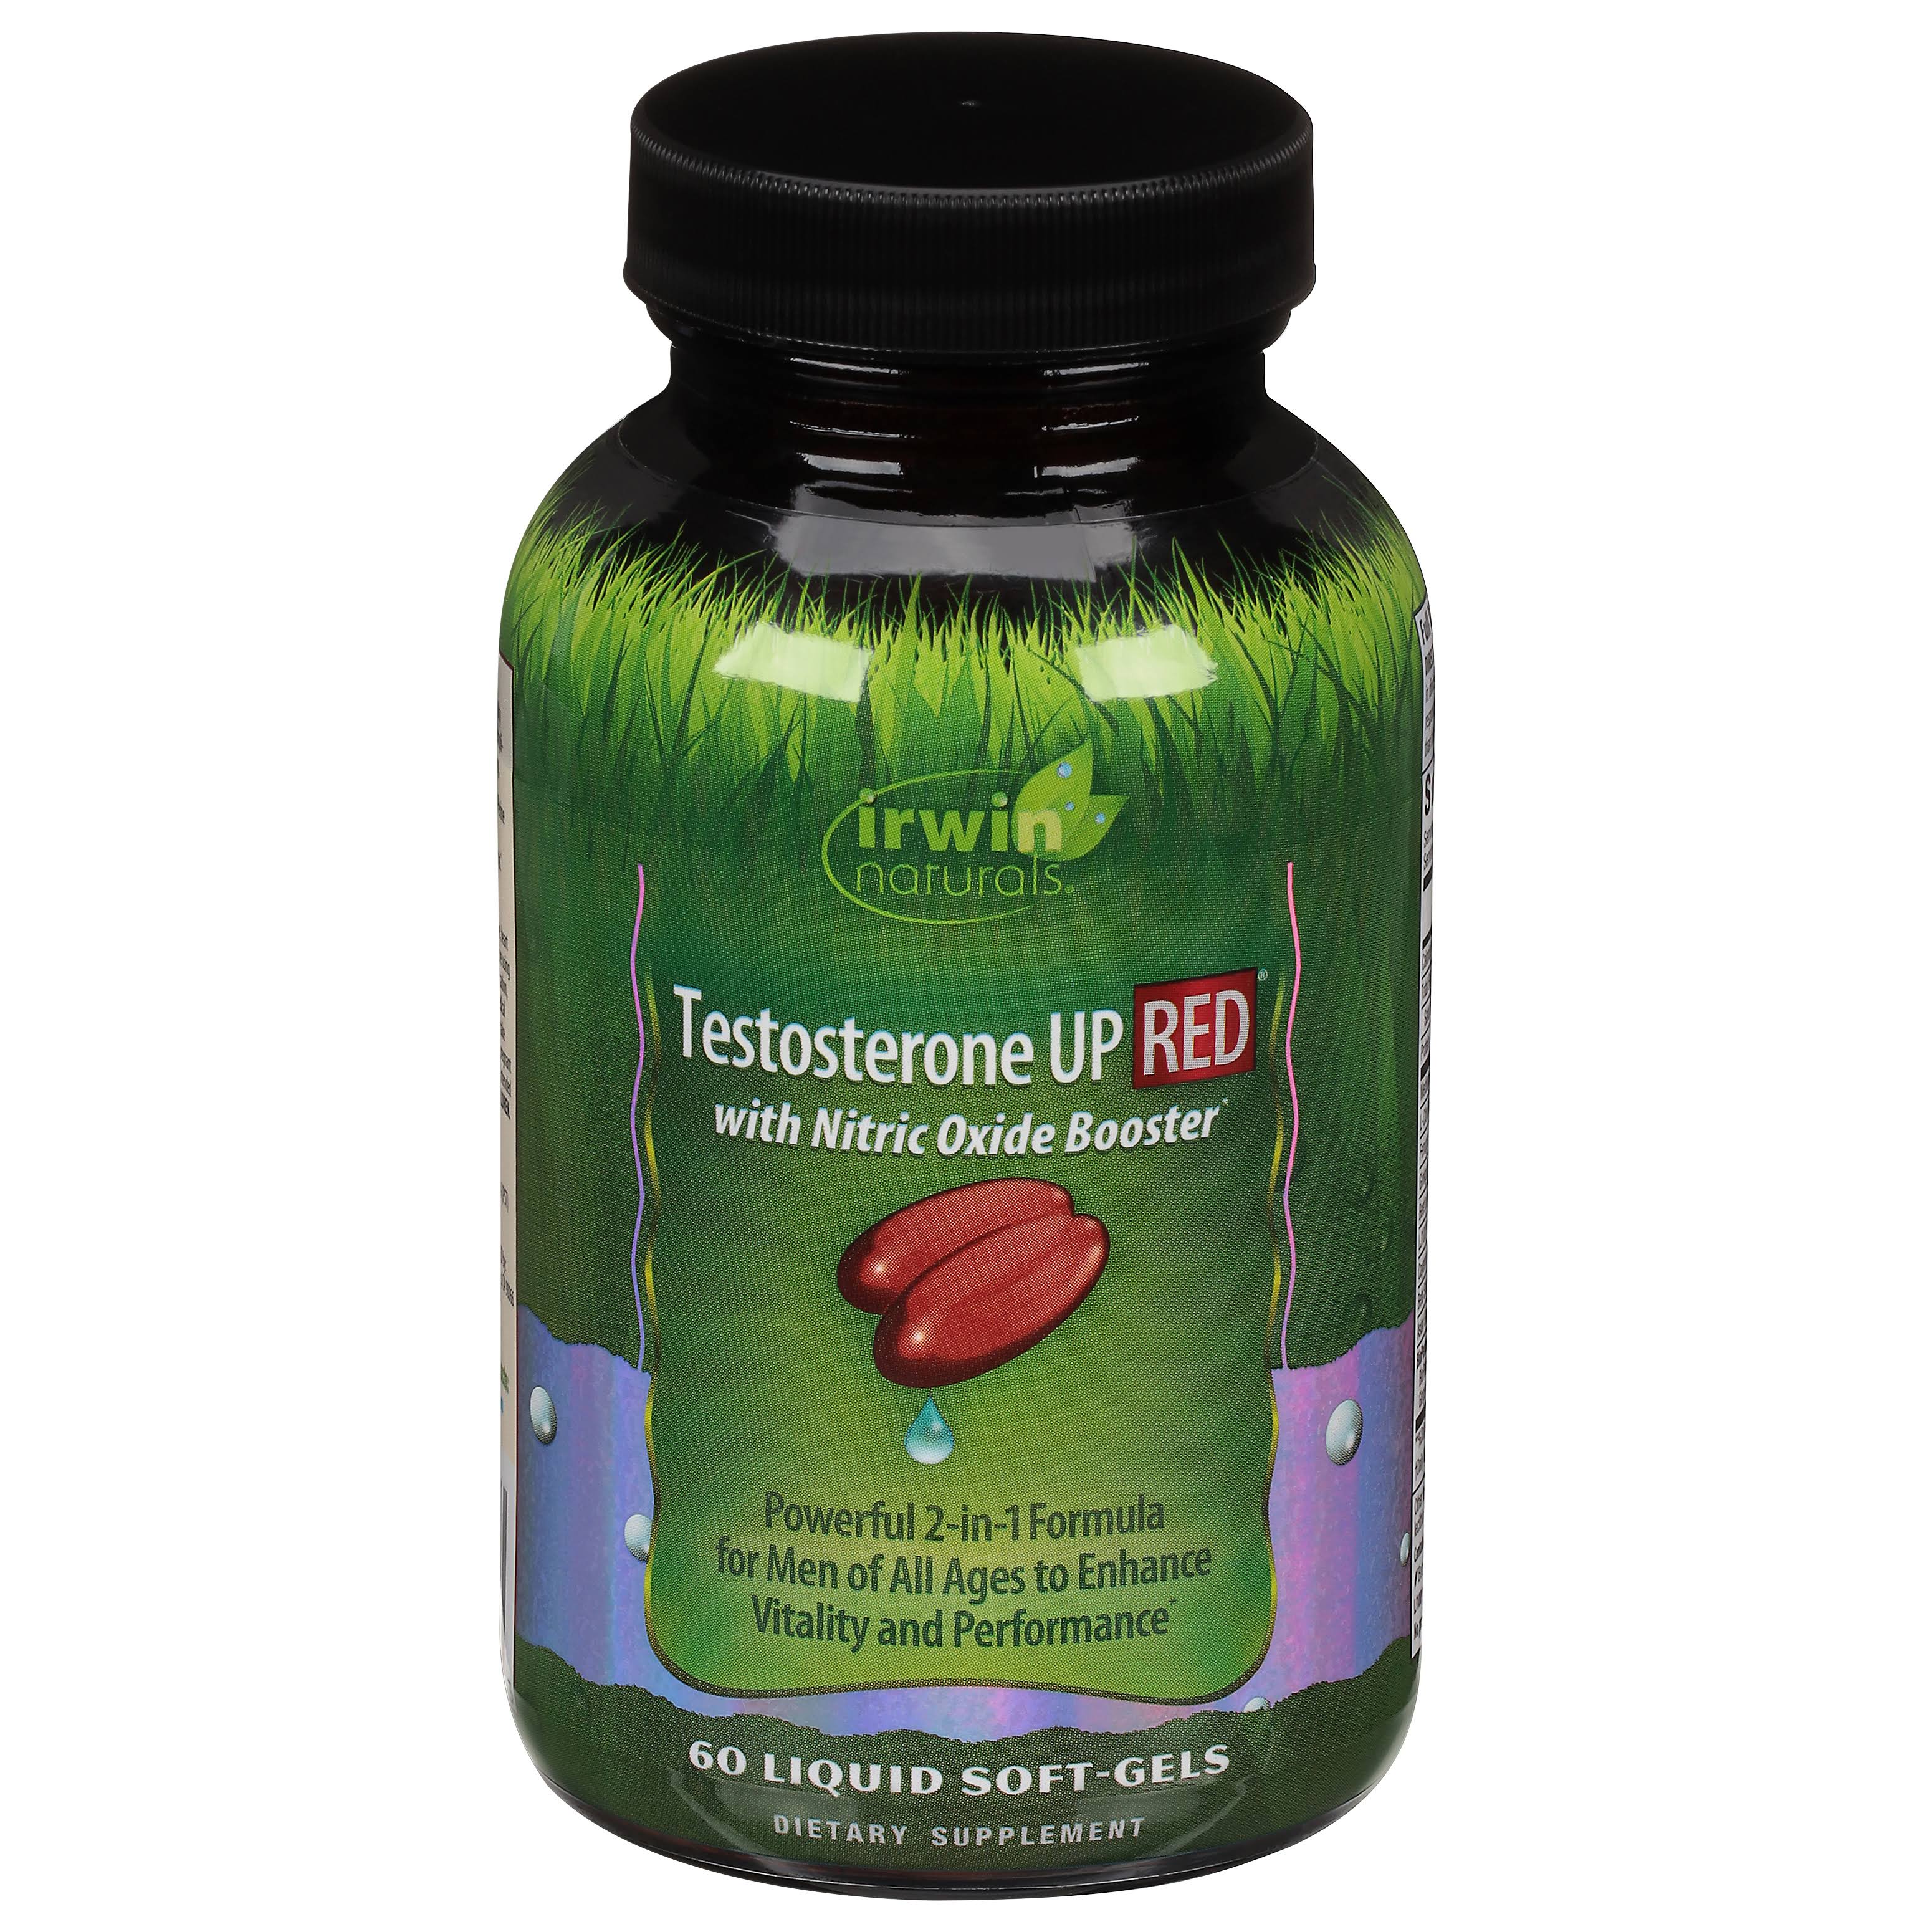 Irwin Naturals Testosterone up Red with Nitric Oxide Boosters Supplement - 60 Liquid Soft-gels